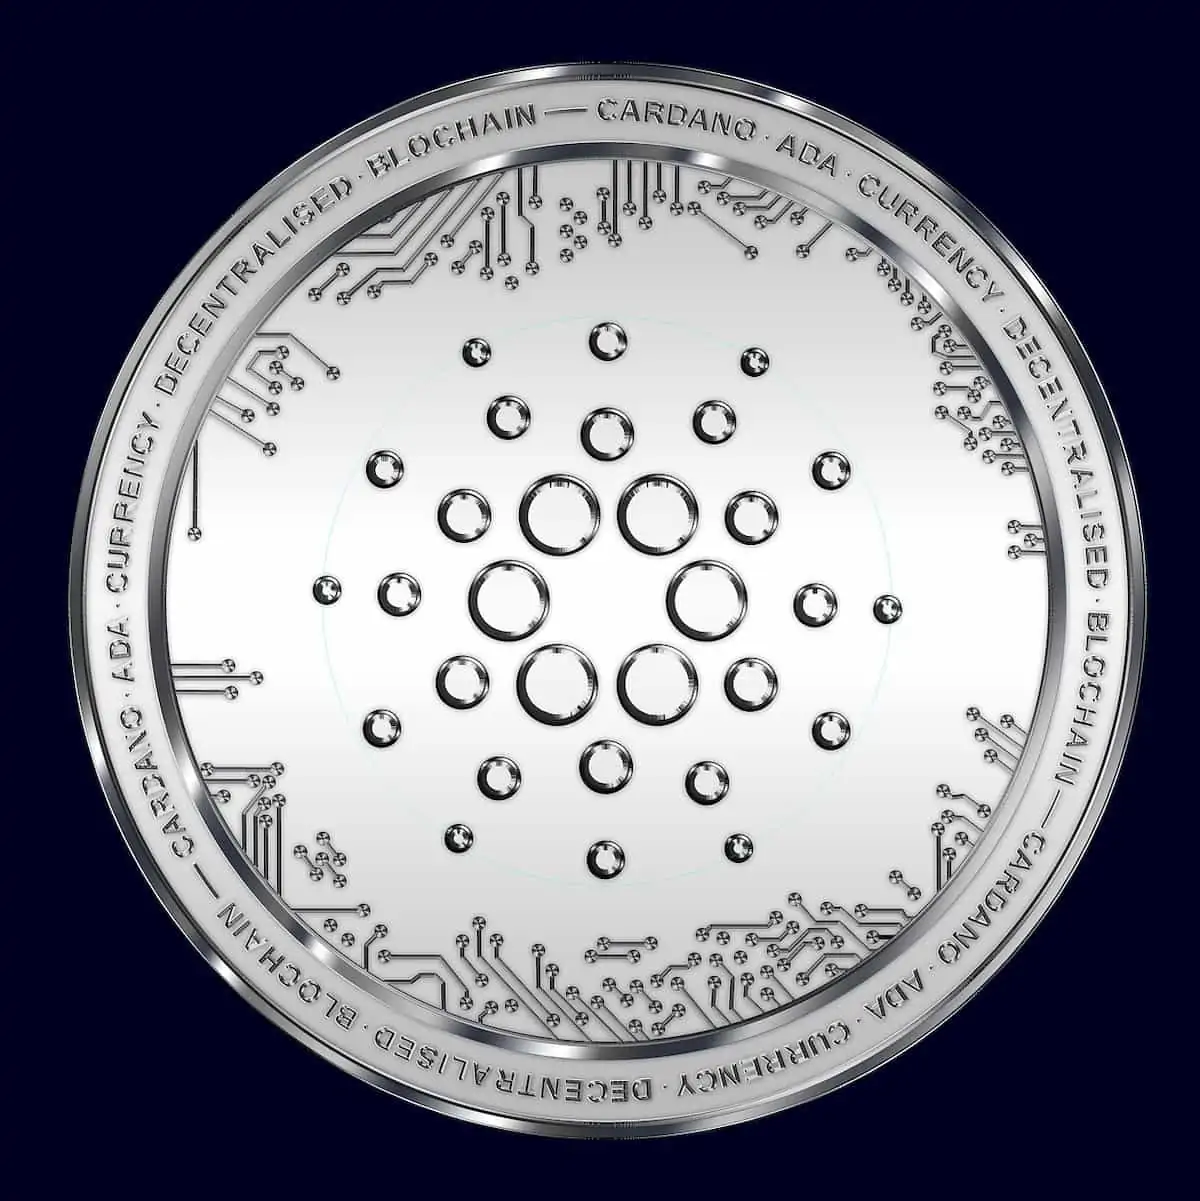 Cardano Cryptocurrency Price Predictions!